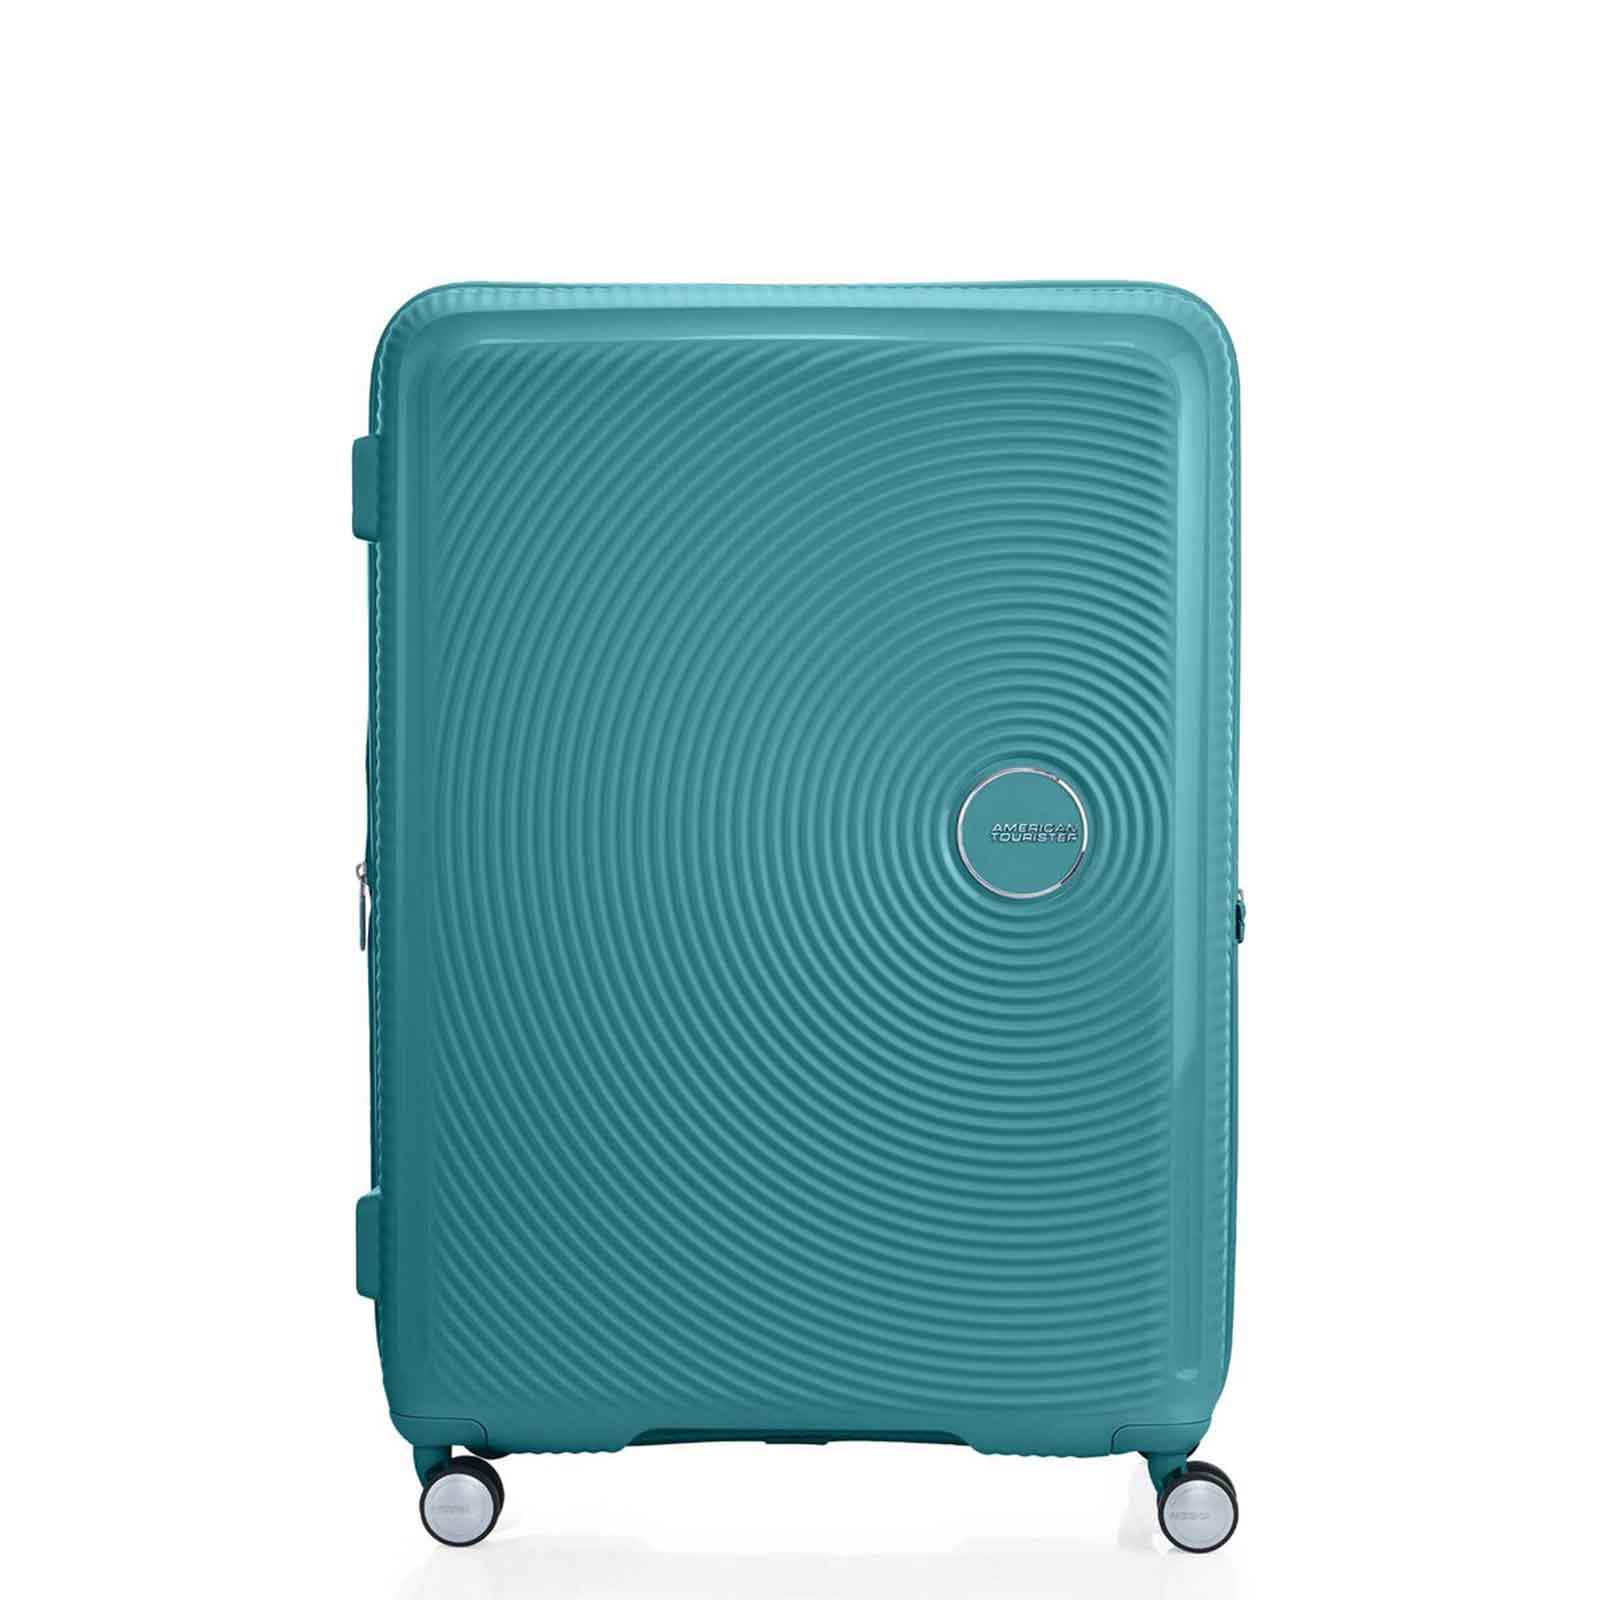 American-Tourister-Curio-2-80cm-Suitcase-Jade-Green-Front